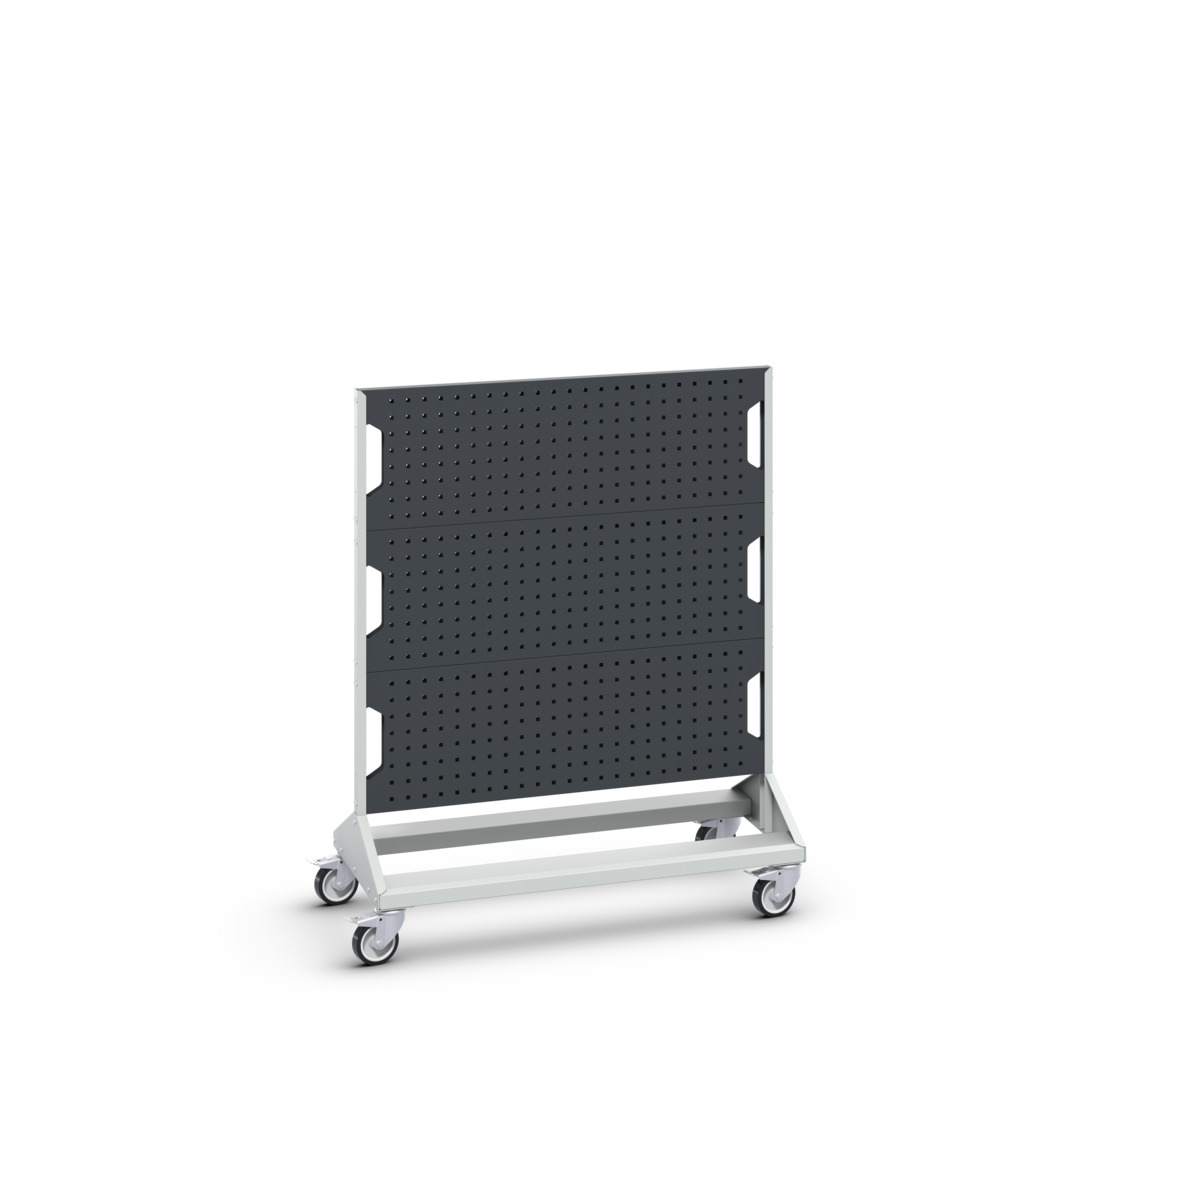 16917160. - perfo panel trolley double sided